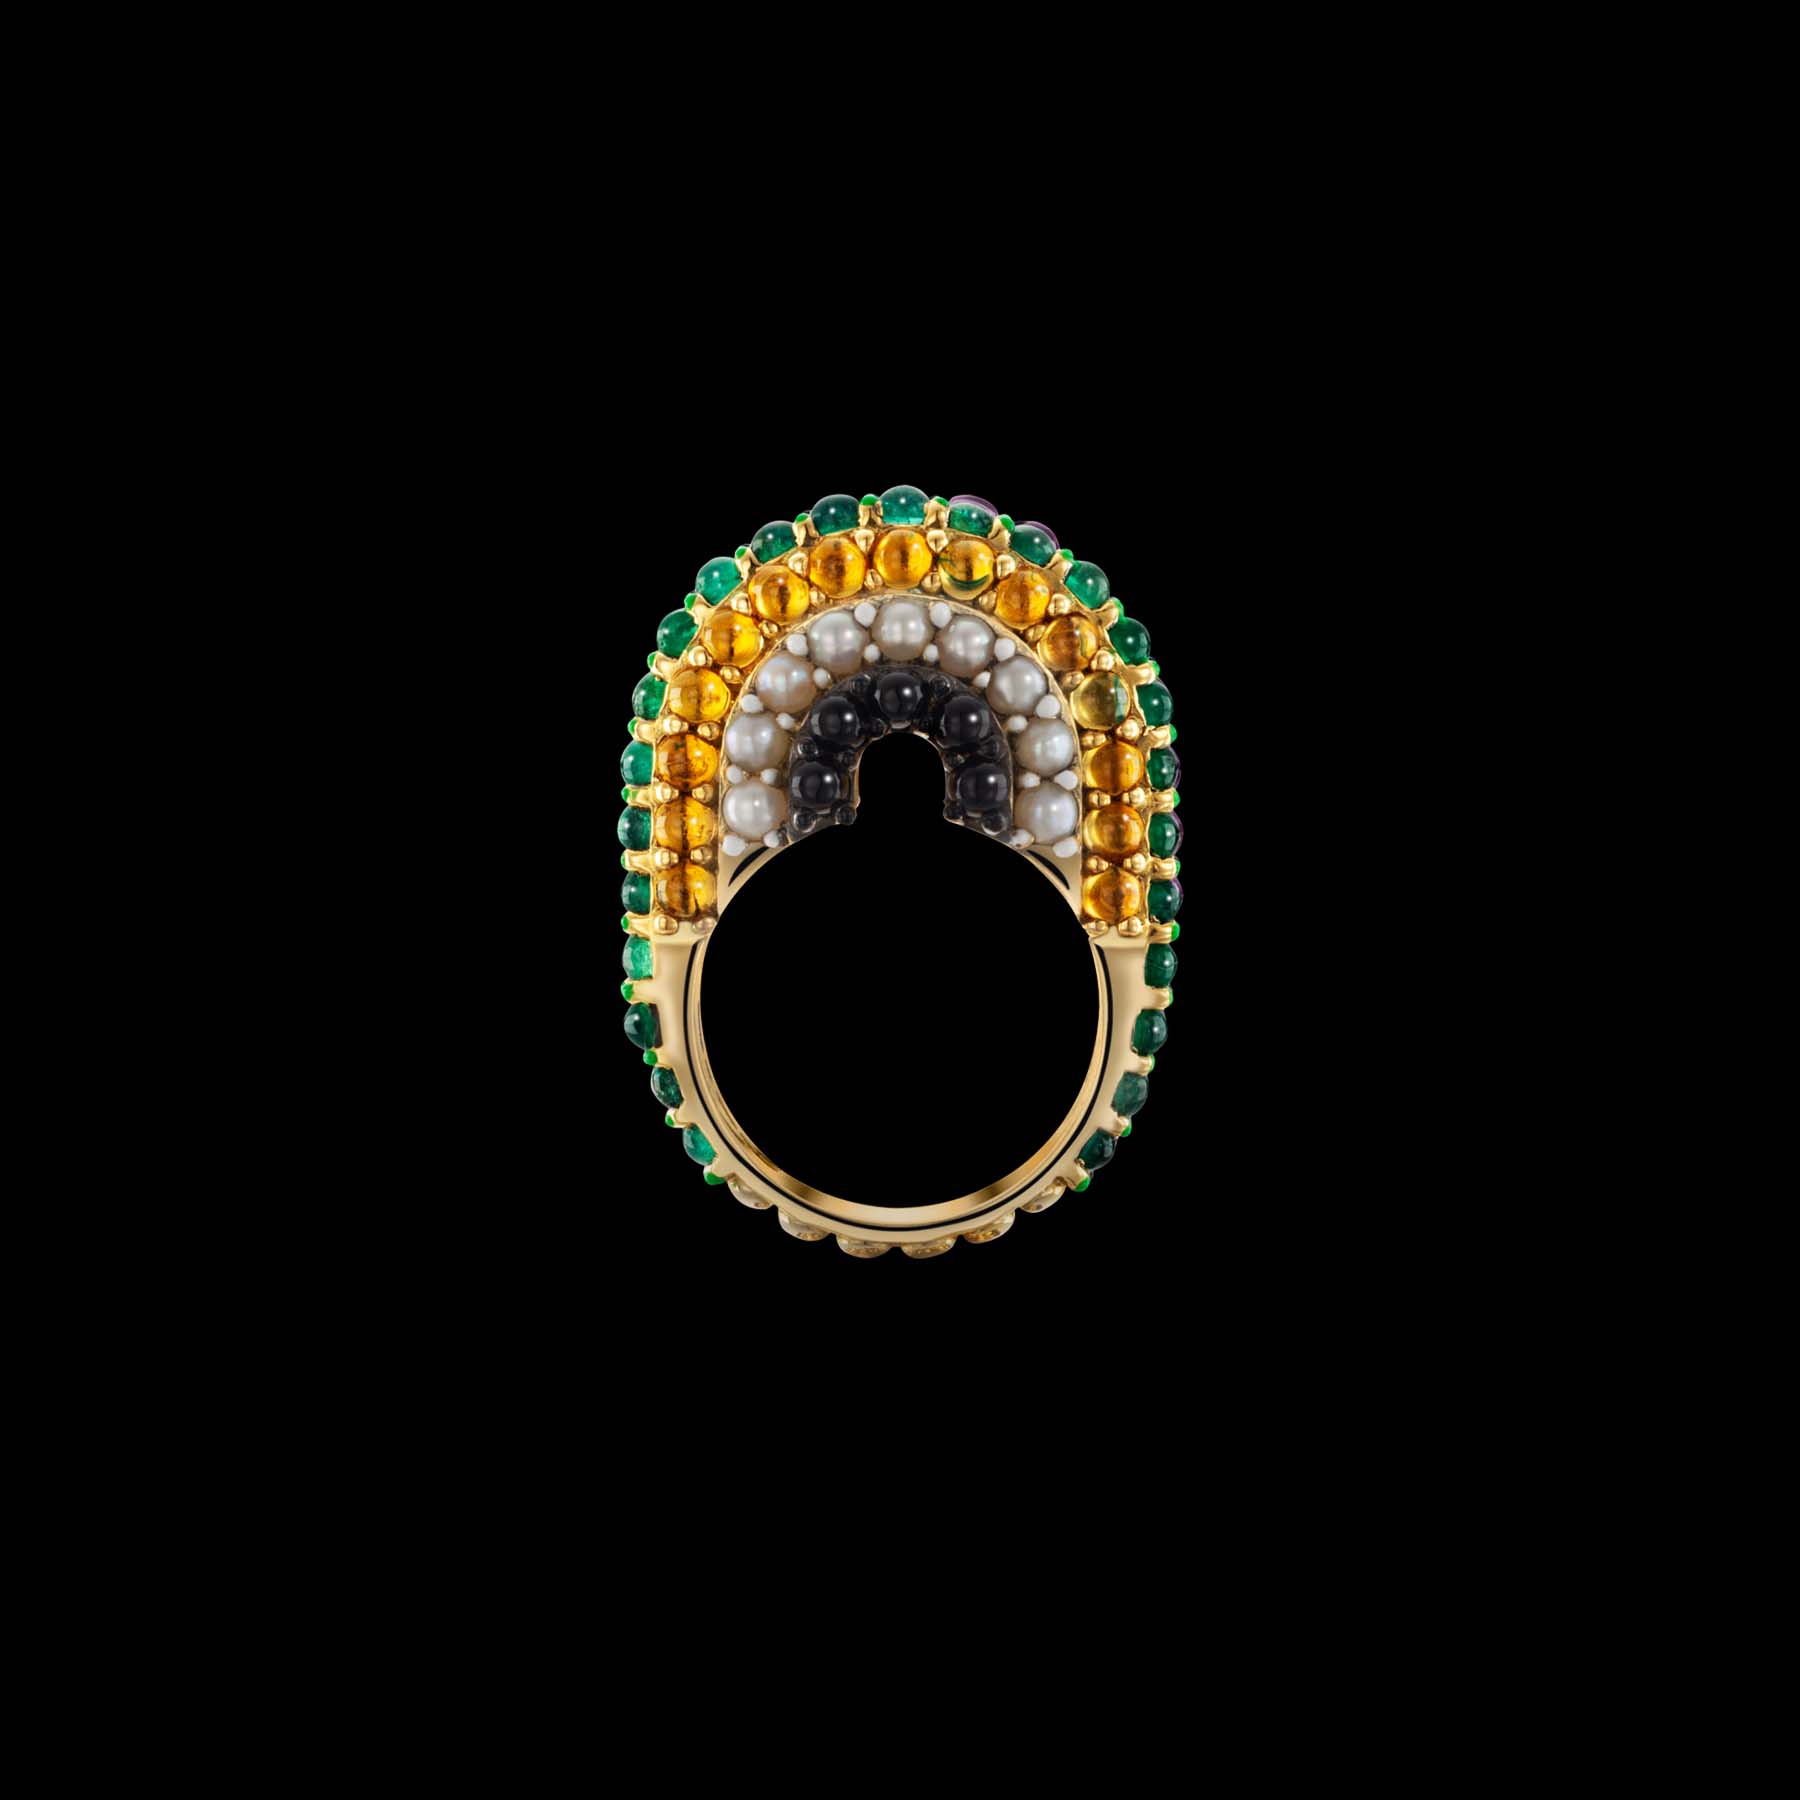 Colourway Rainbow ring by designer Solange Azagury-Partridge - 18k Yellow Gold, gemstones and enamel - vertical front view